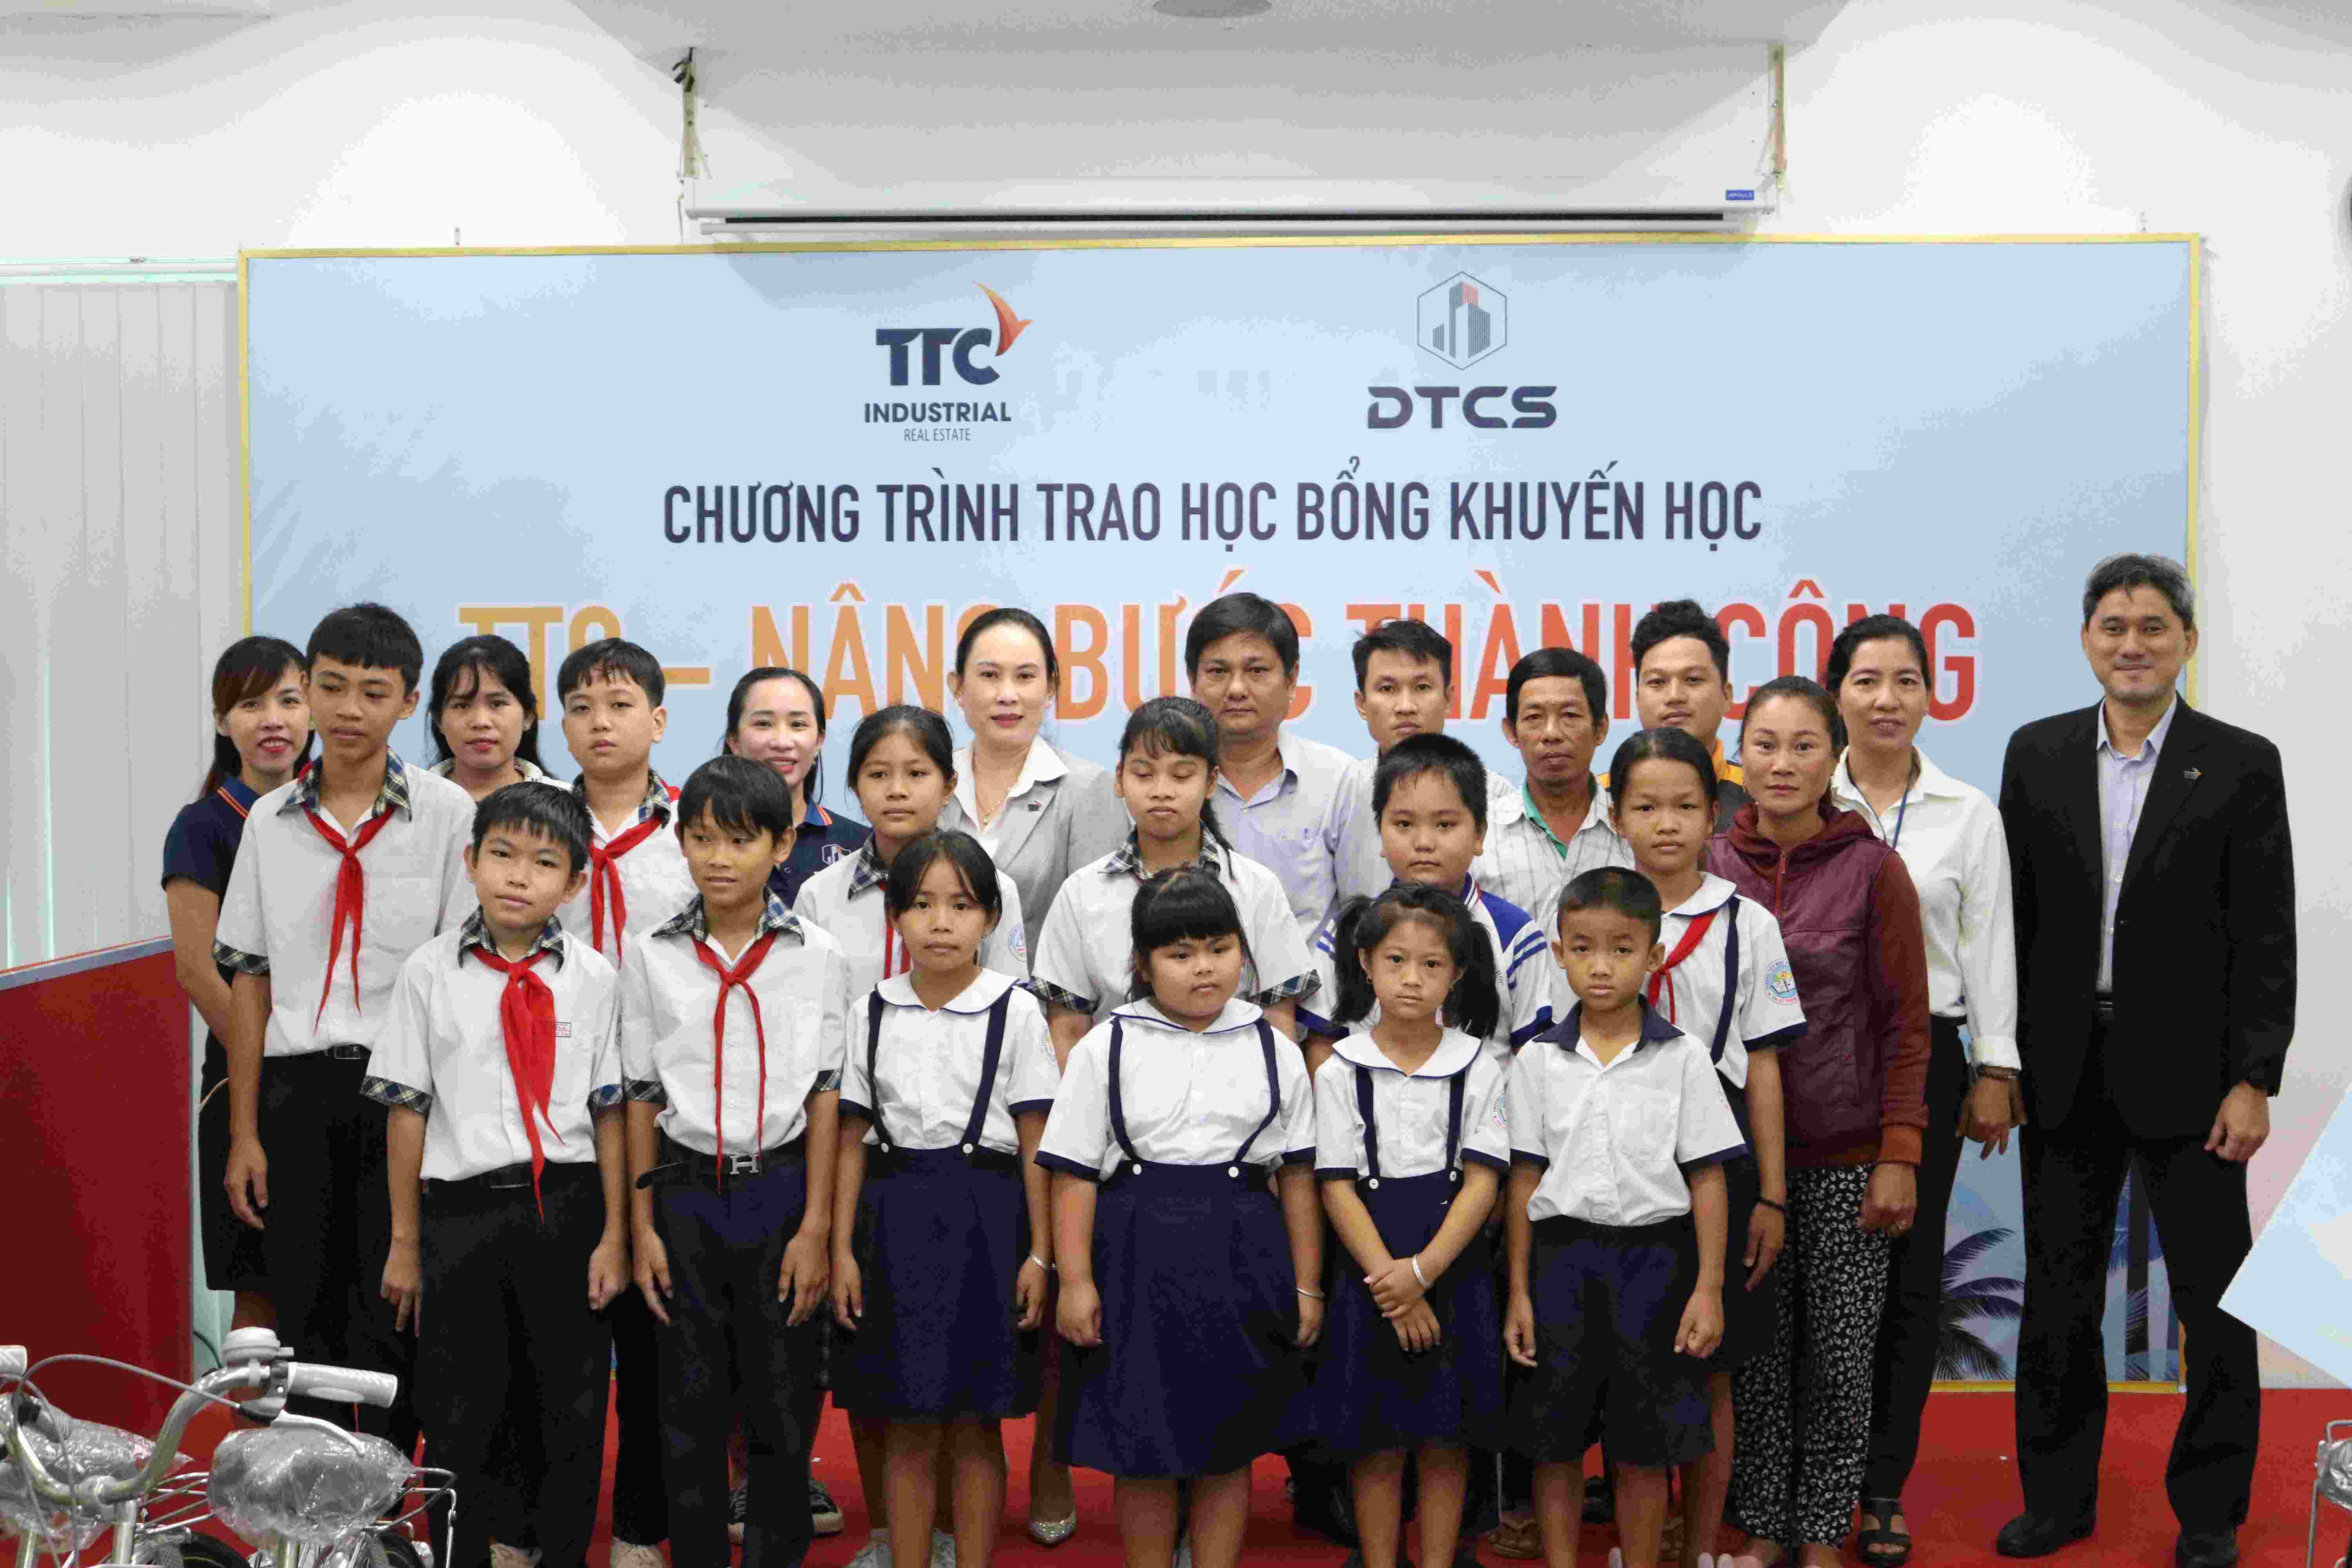 THE 37th SCHOLARSHIP PROMOTION “TTC - ENHANCED STEPS TO SUCCESS”